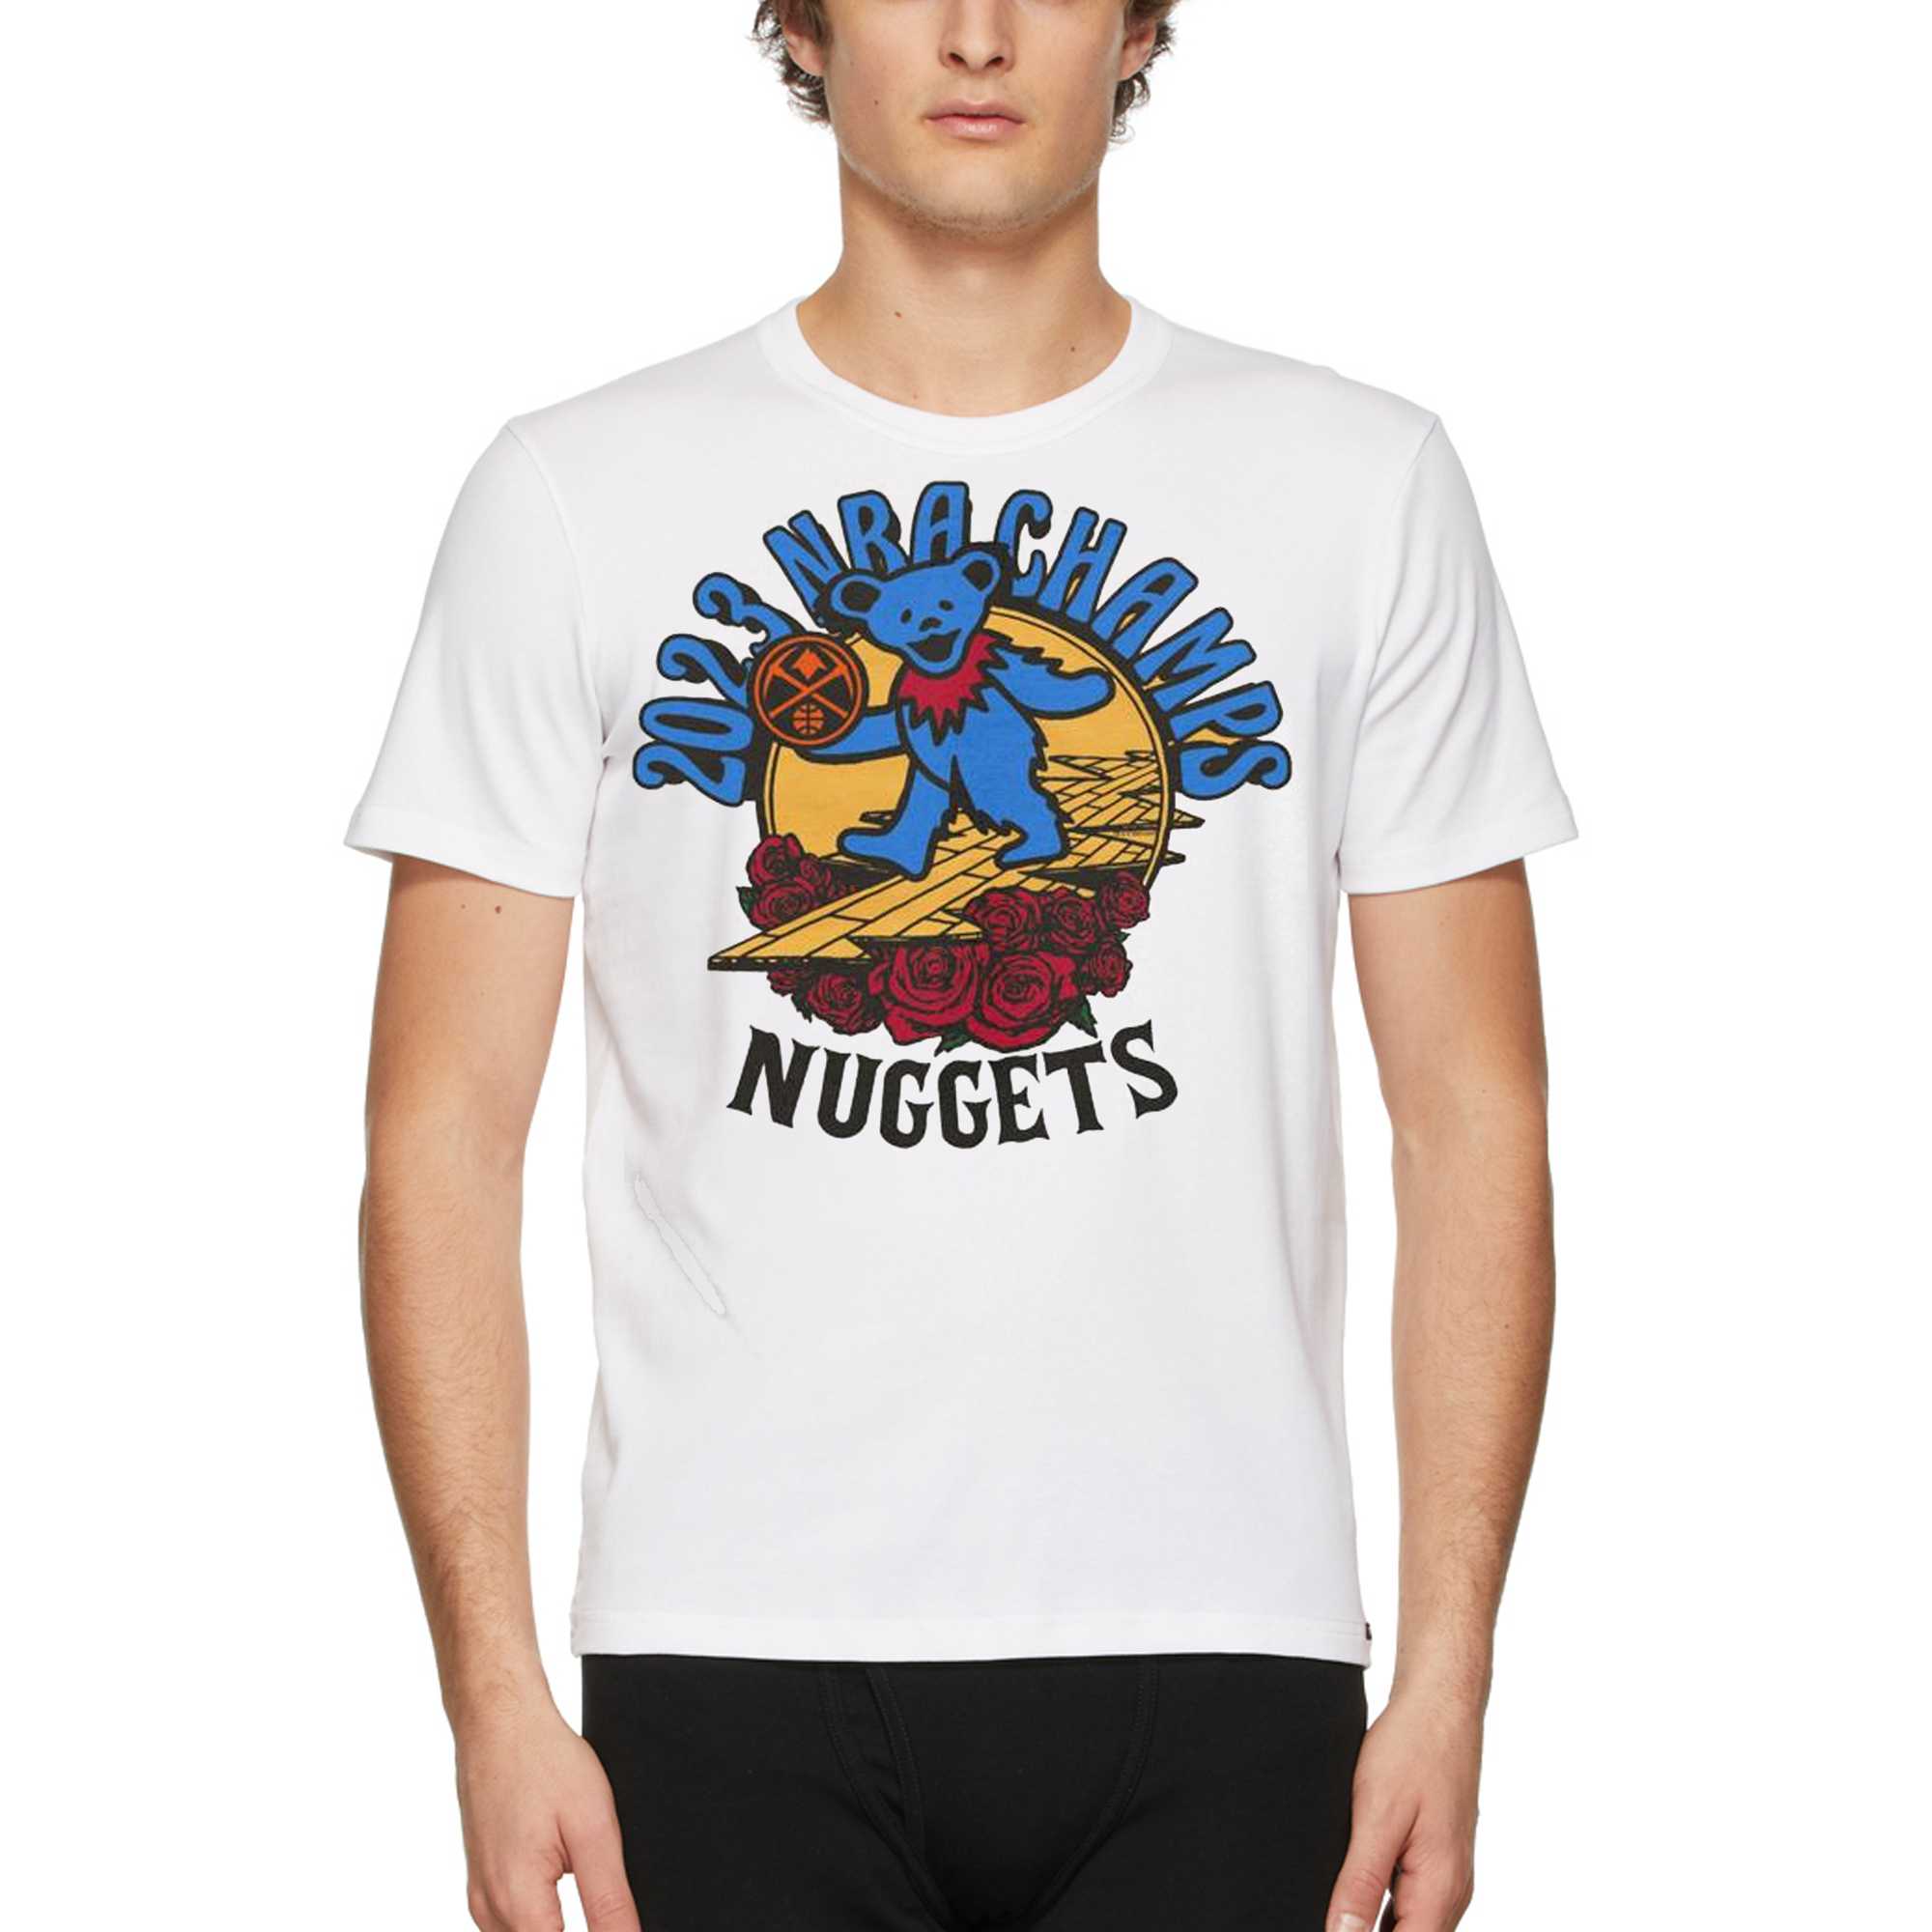 NBA x Grateful Dead x Warriors T-Shirt from Homage. | Royal Blue | Vintage Apparel from Homage.